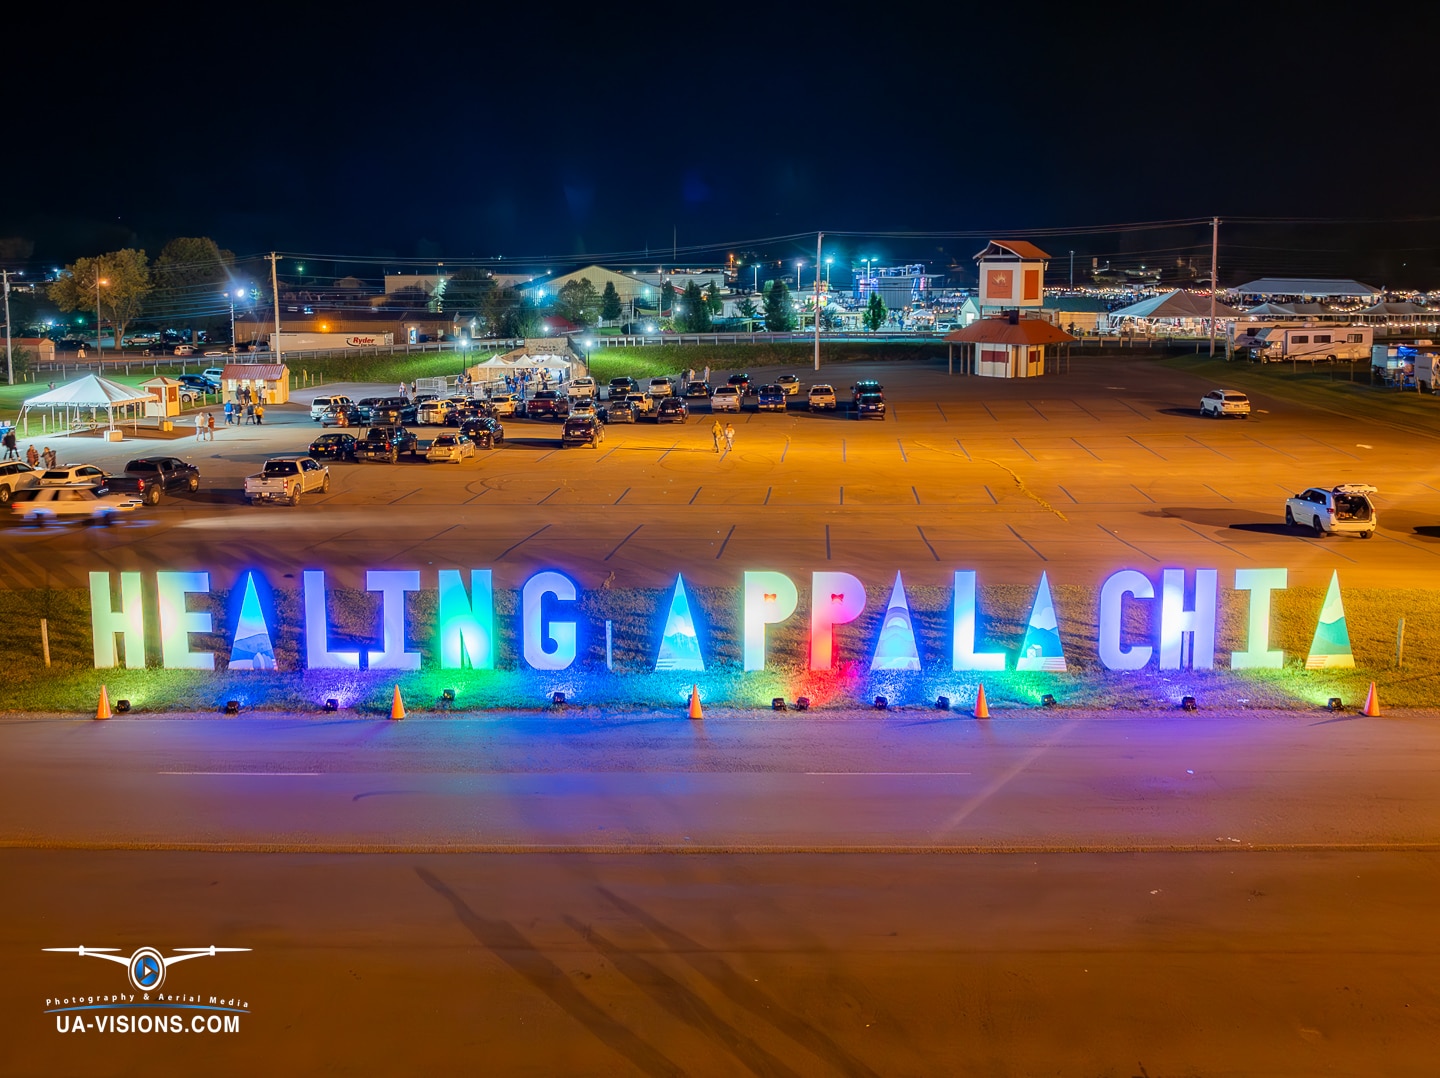 Night view of Healing Appalachia sign illuminated in colorful lights.